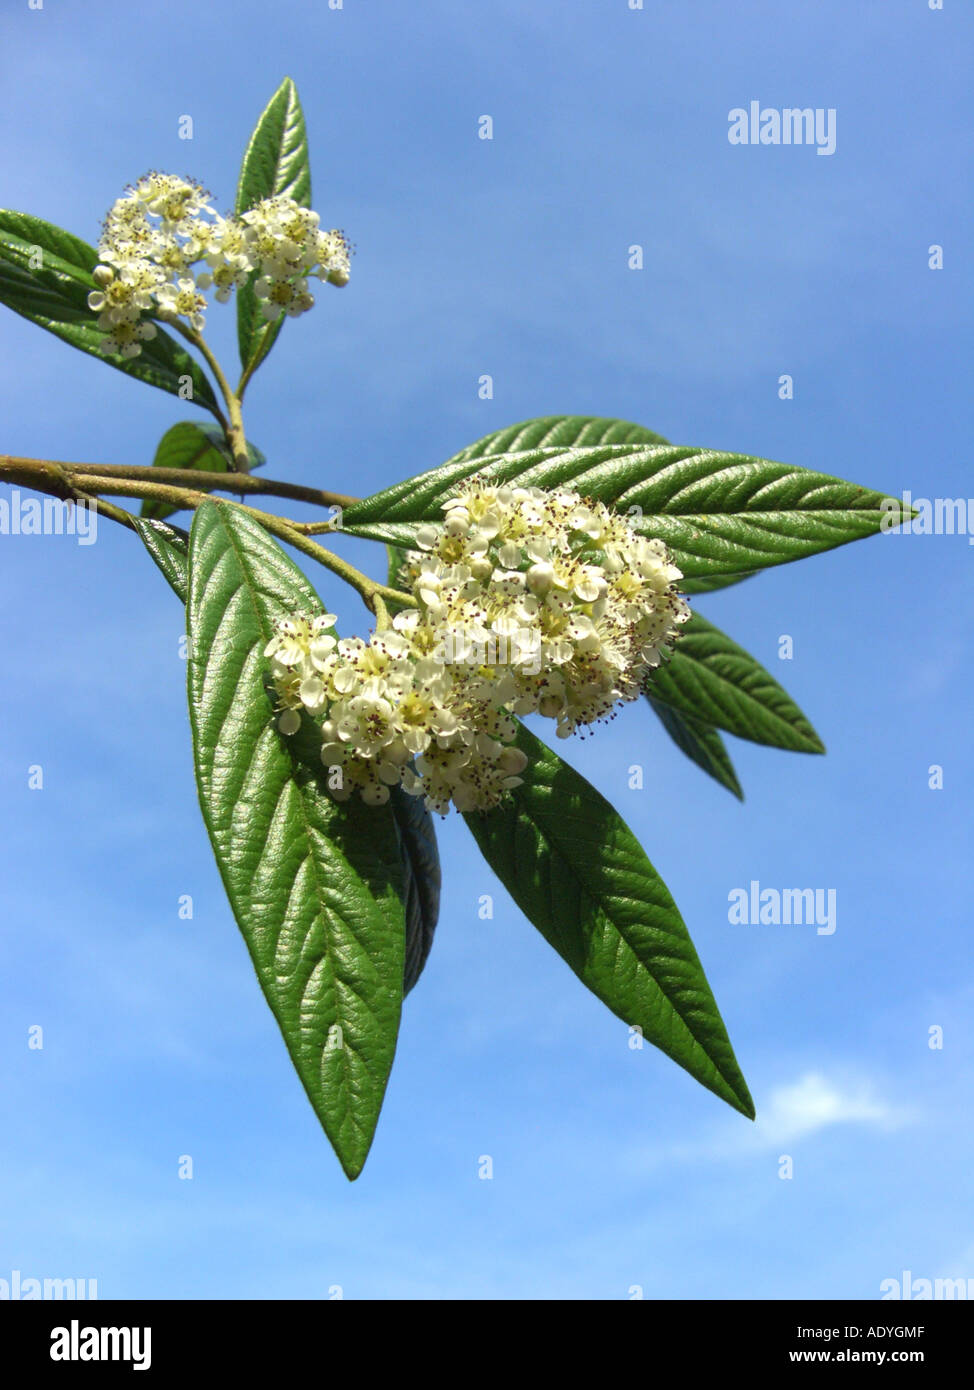 Willowleaf Cotoneaster (Cotoneaster salicifolius), blooming twig against blue sky Stock Photo